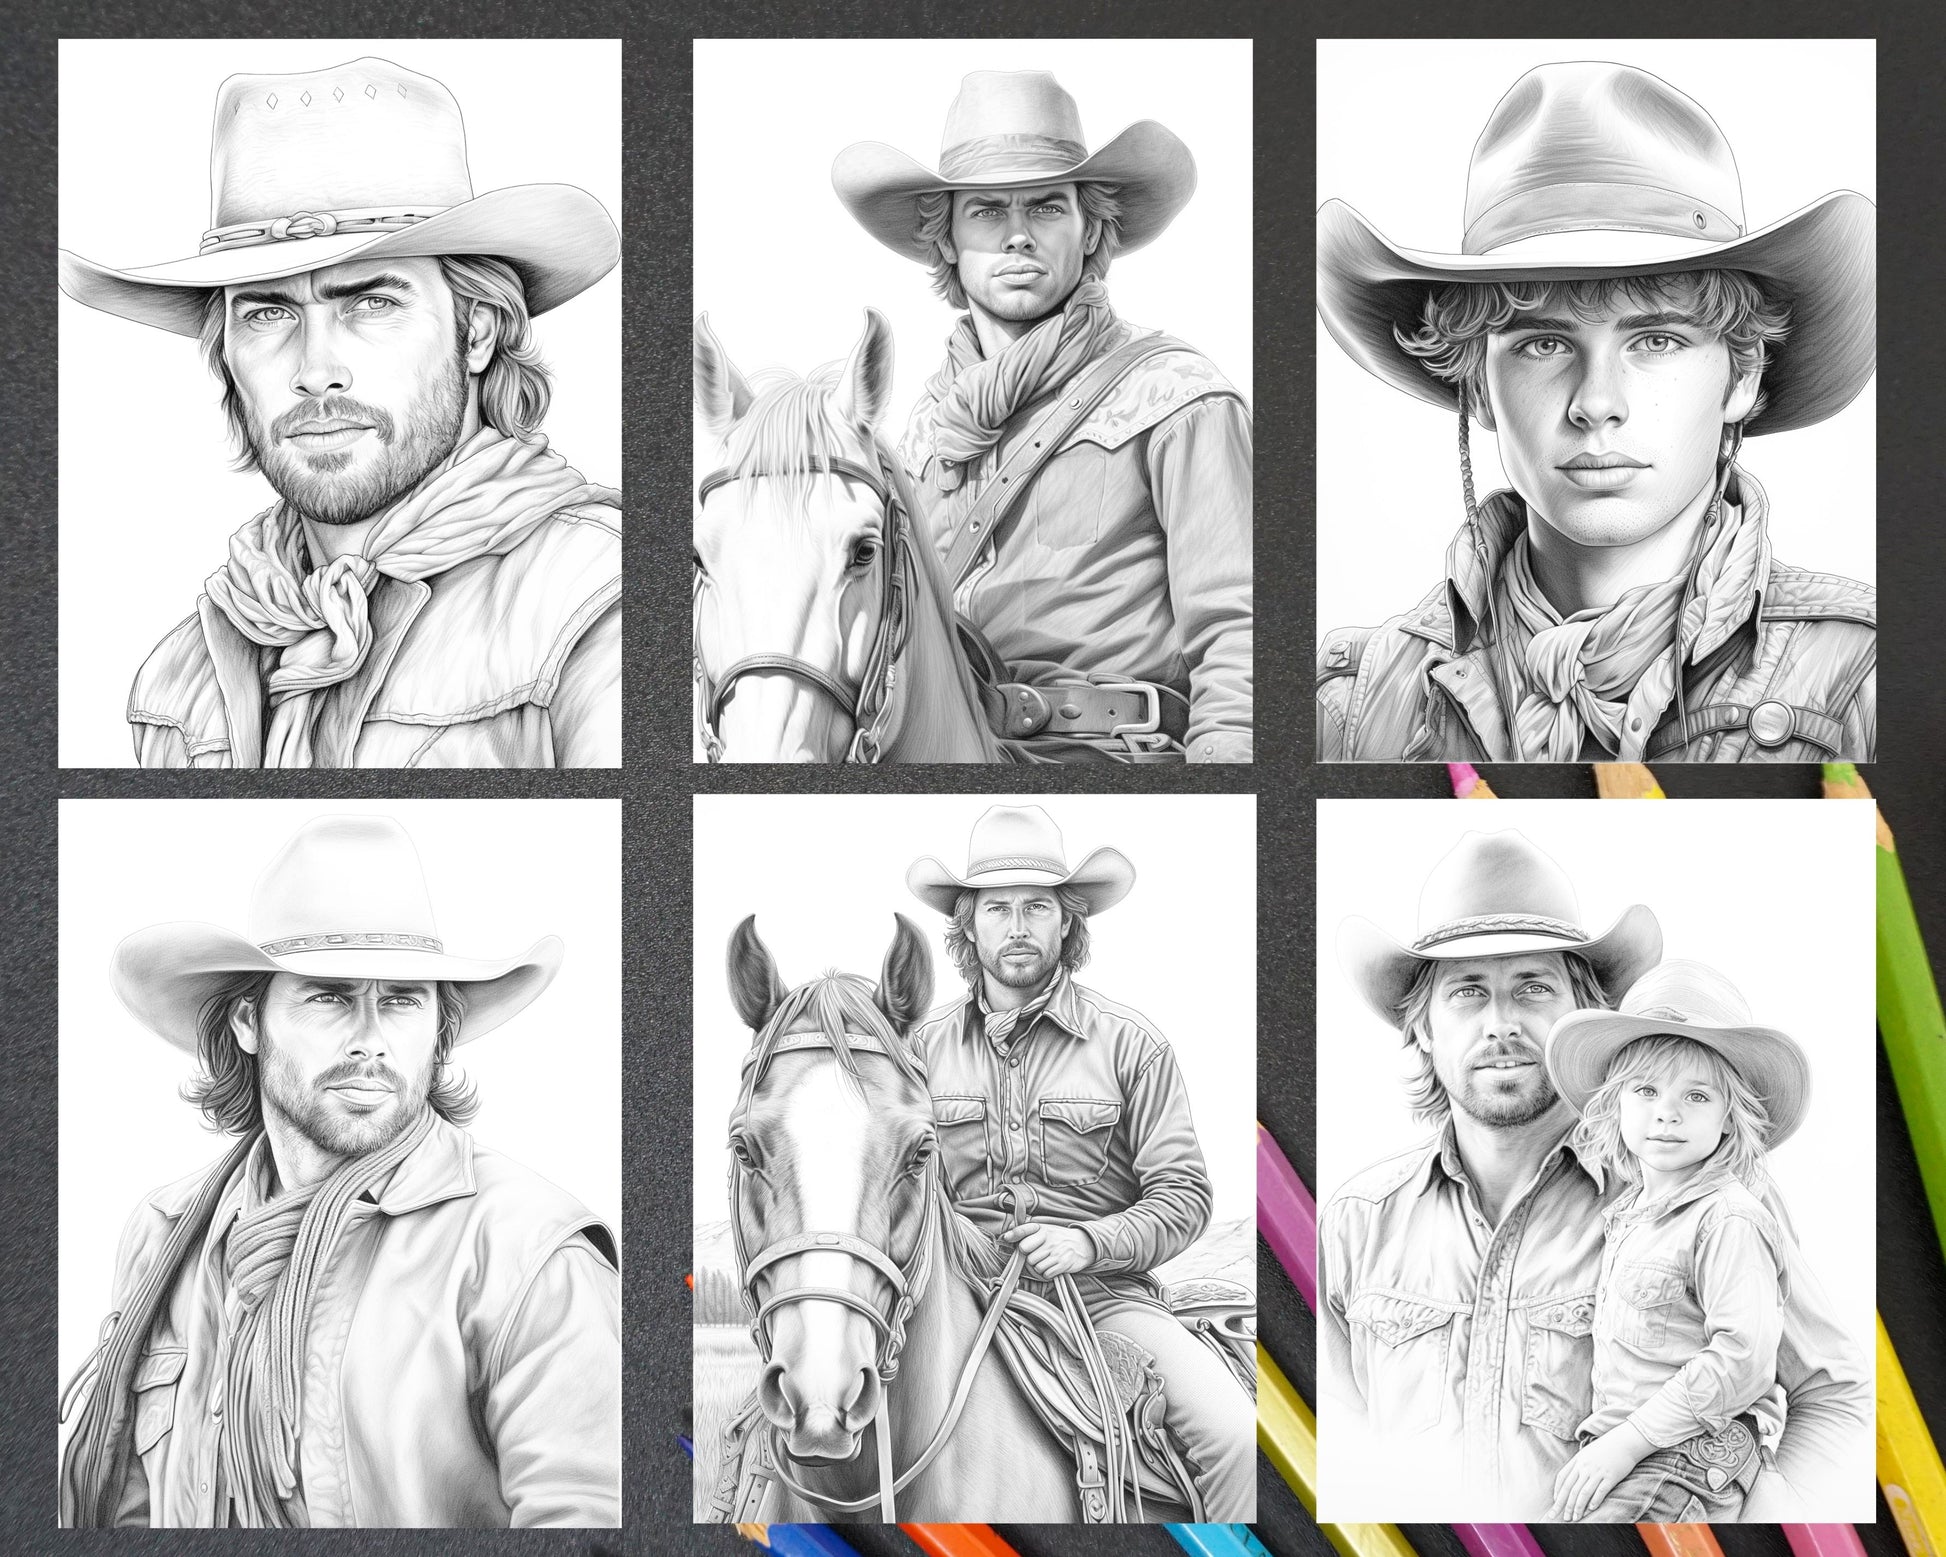 Wild West Cowboys Grayscale Coloring Pages, Printable for Adults Cowboy Illustrations, Western Themed Adult Coloring Book, Vintage Cowboys Black and White Coloring, Instant Download Wild West Illustrations